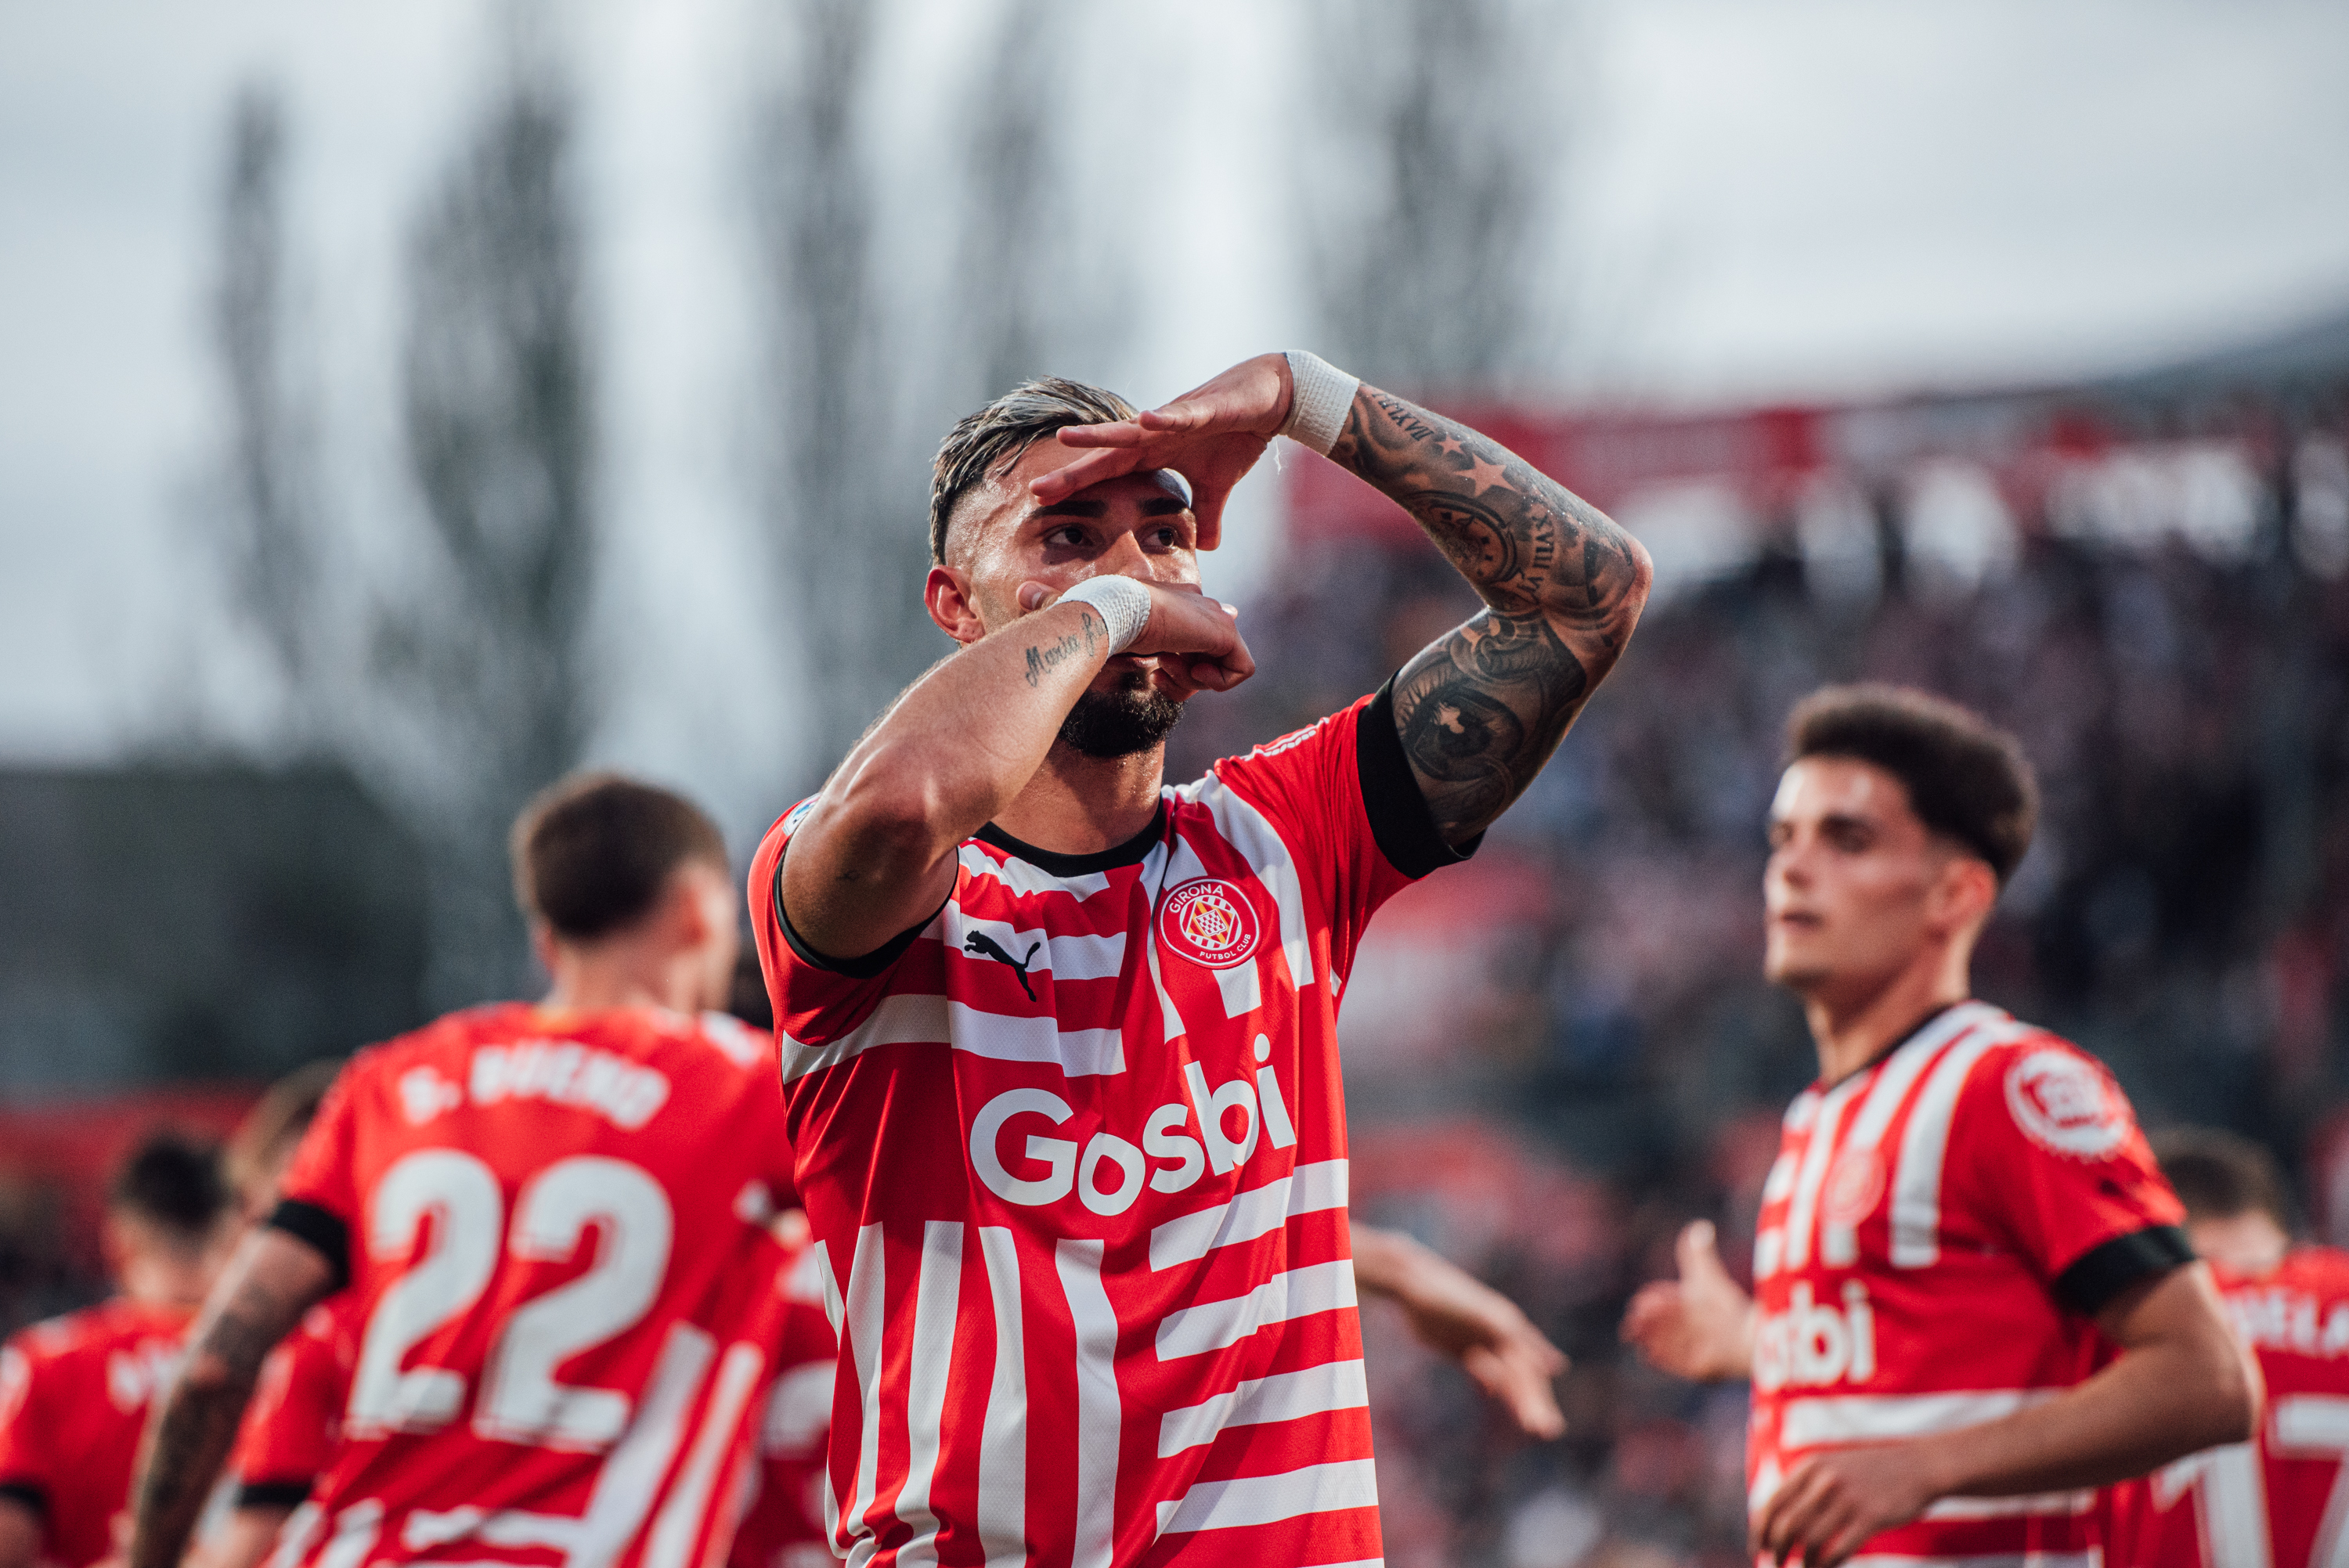 Top of La Liga: Girona FC breaking records and making history - 365Scores